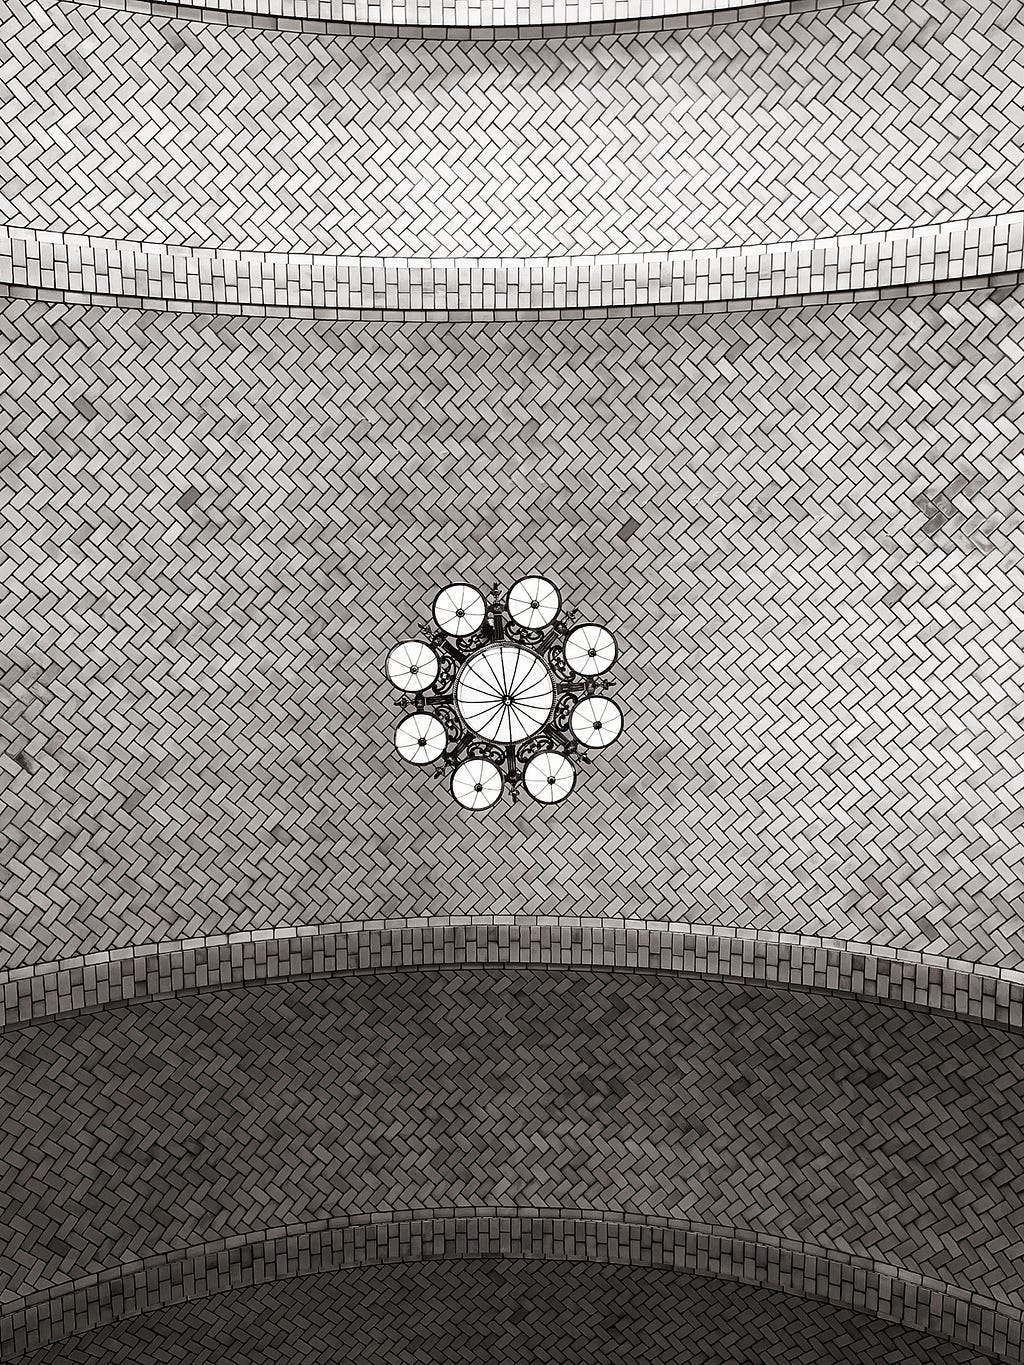 Image of a ceiling in the receiving hall for immigrants on ellis island in ny